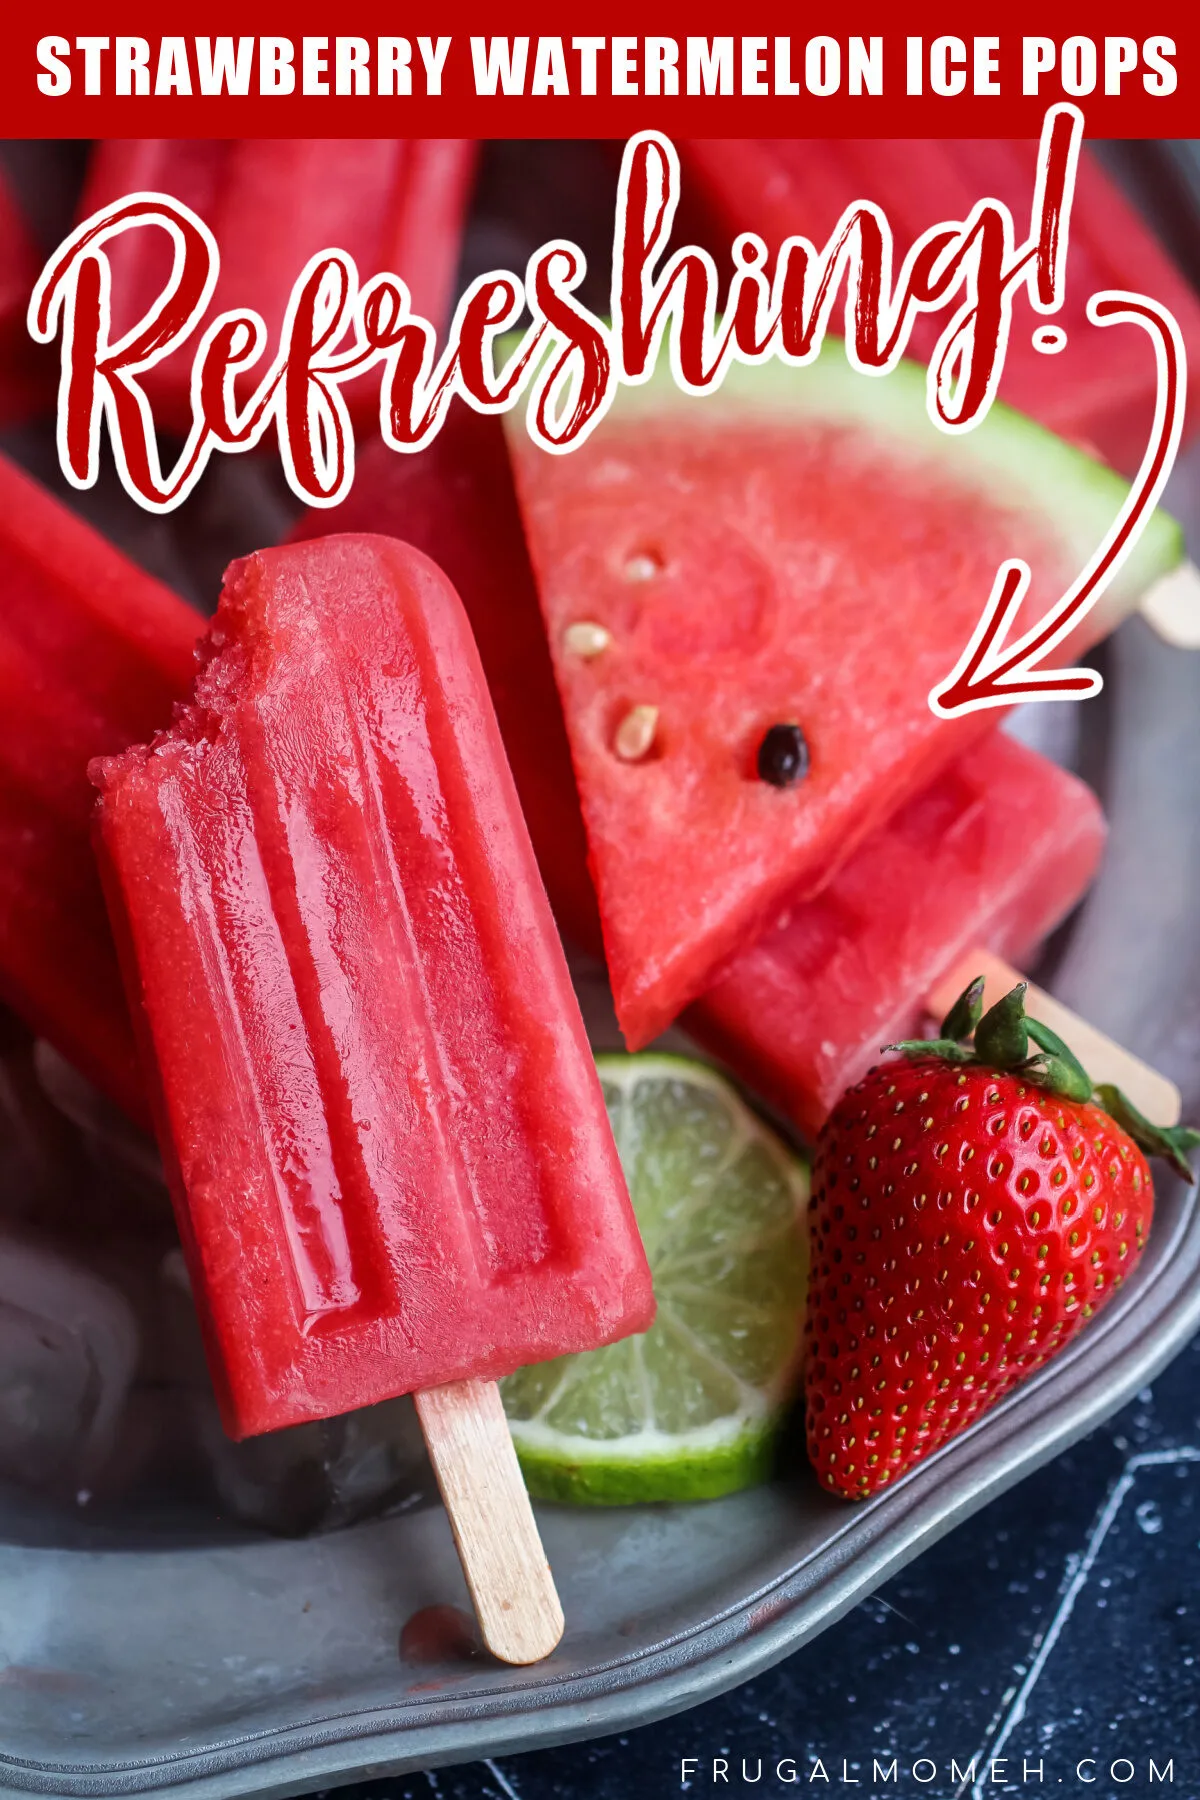 A simple recipe for strawberry watermelon ice pops for when you want a refreshing treat to keep your family cool on hot summer days.